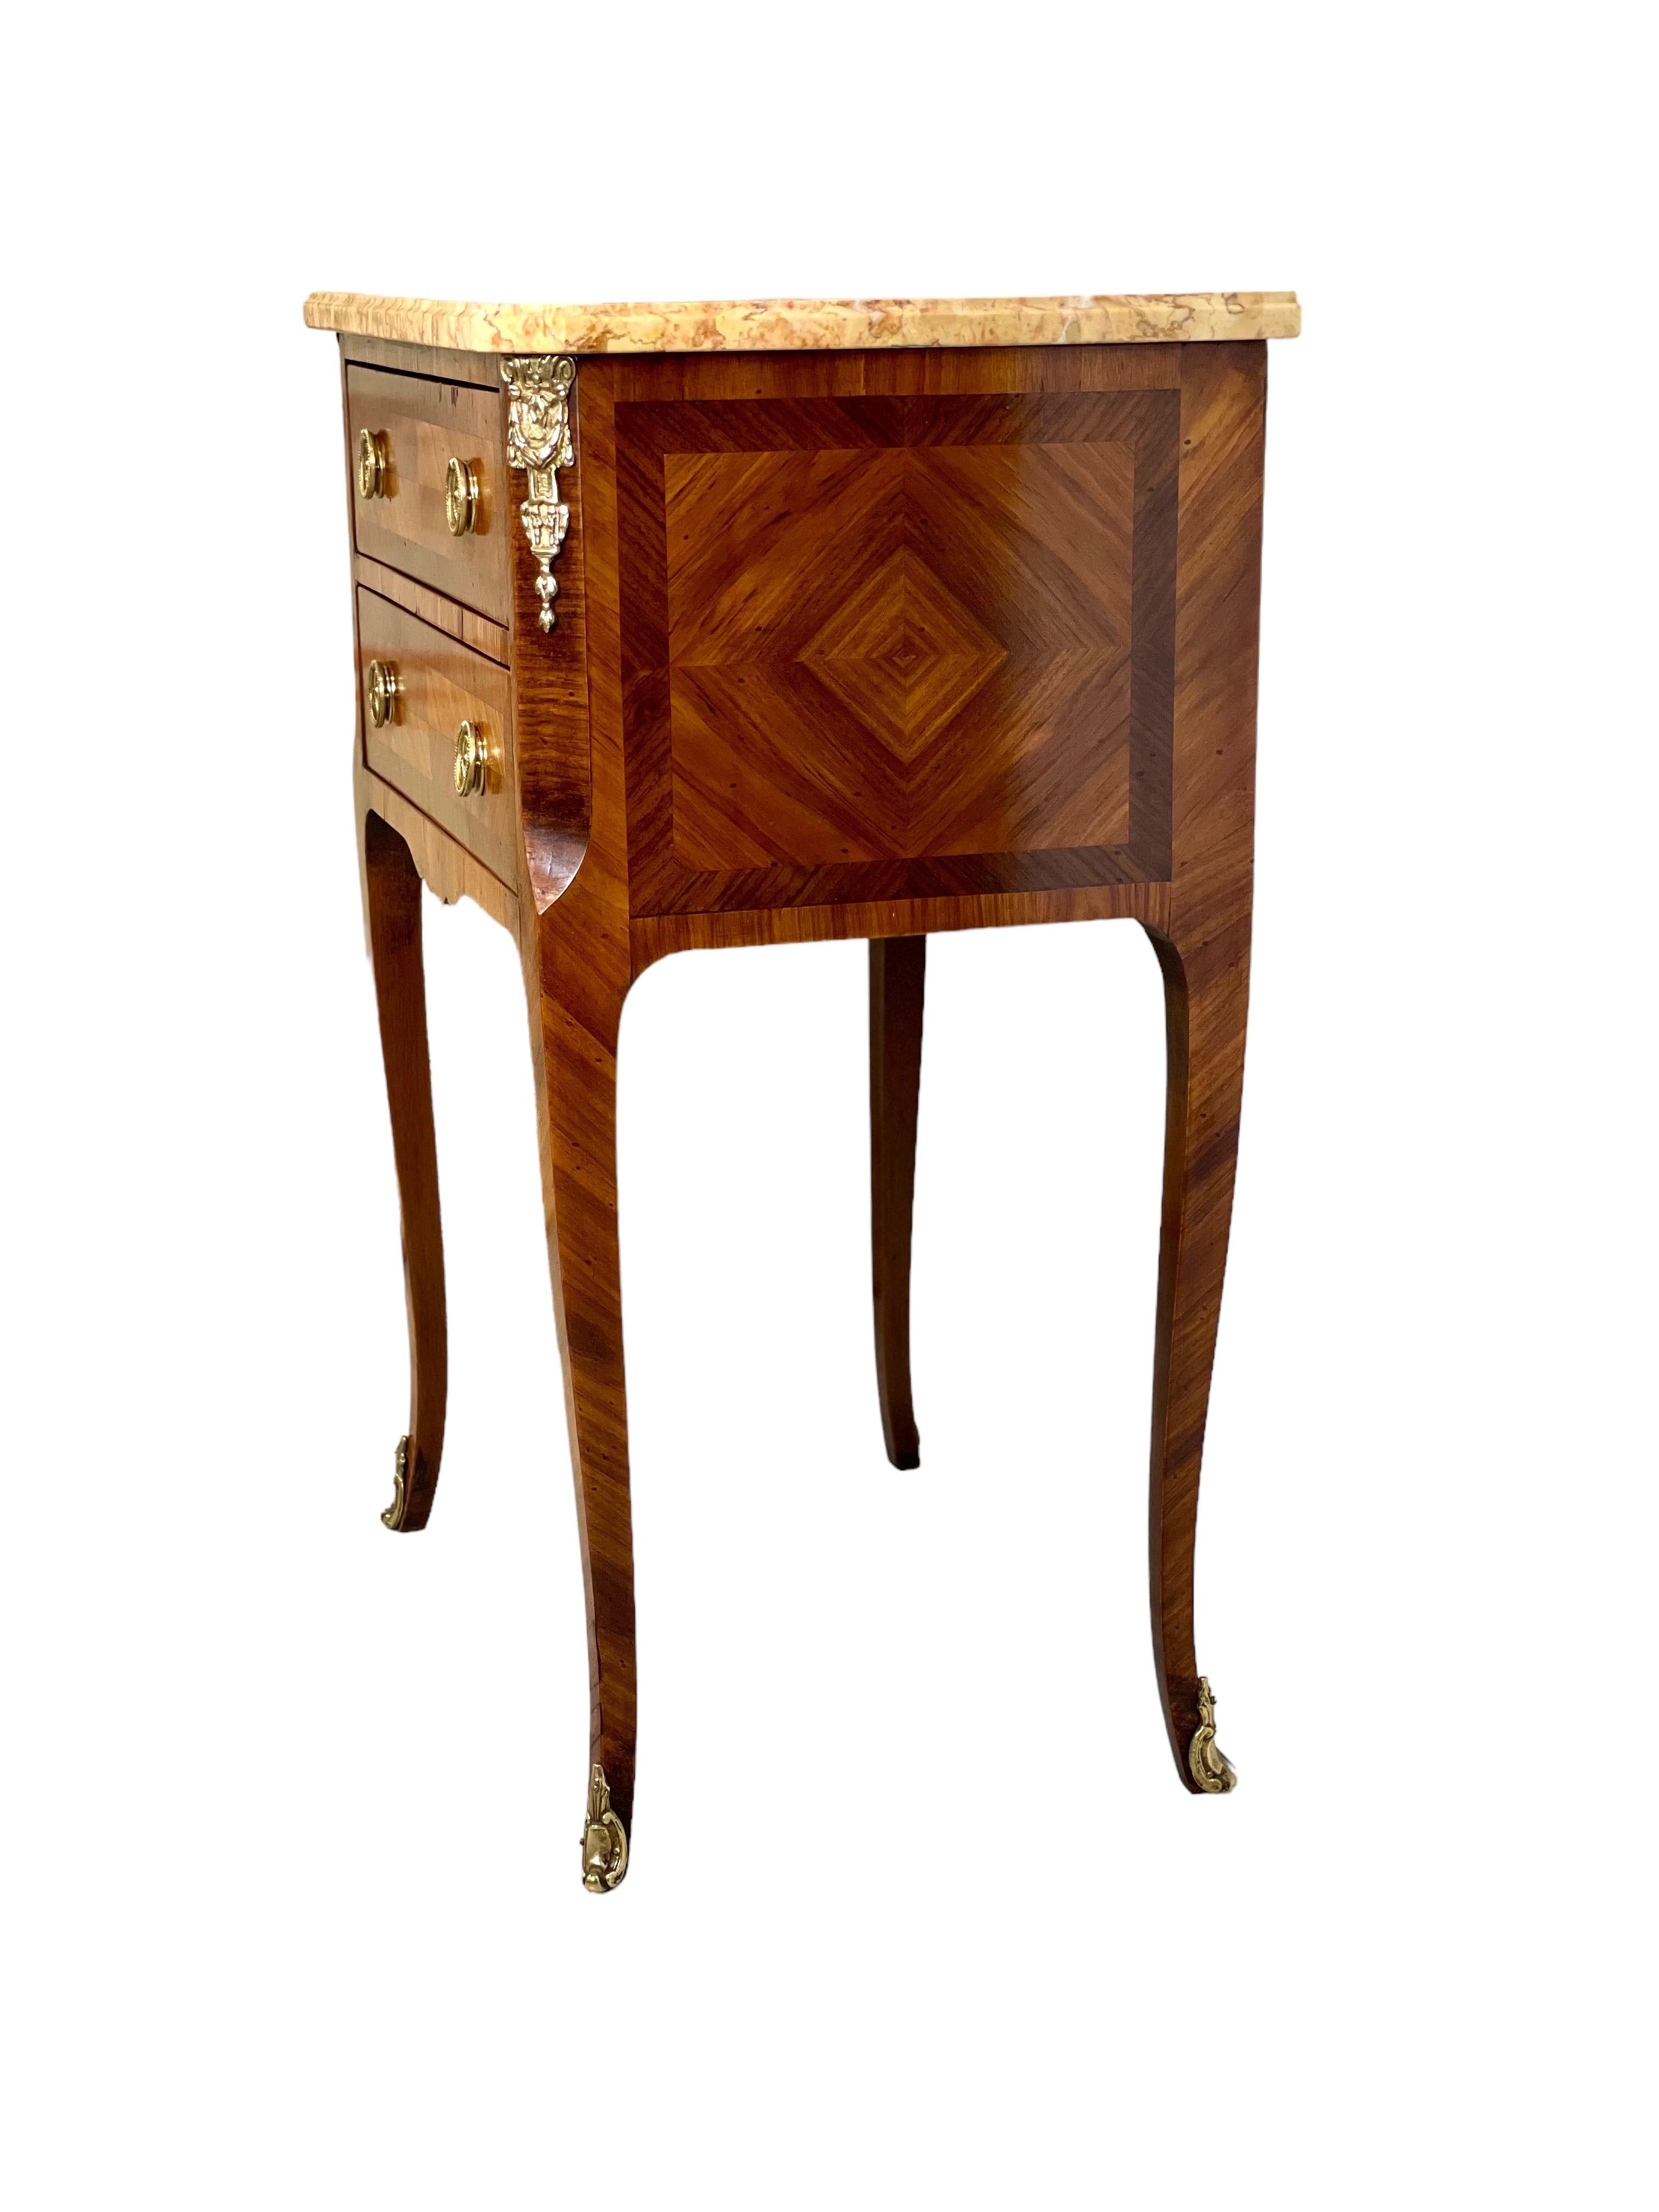 A charming French transitional style 'table de chevet', or bedside table, the façade of which features two drawers magnificently inlaid with a diamond motif across their fronts. The sides are also inlaid with fabulous diamond-shaped veneers, and the